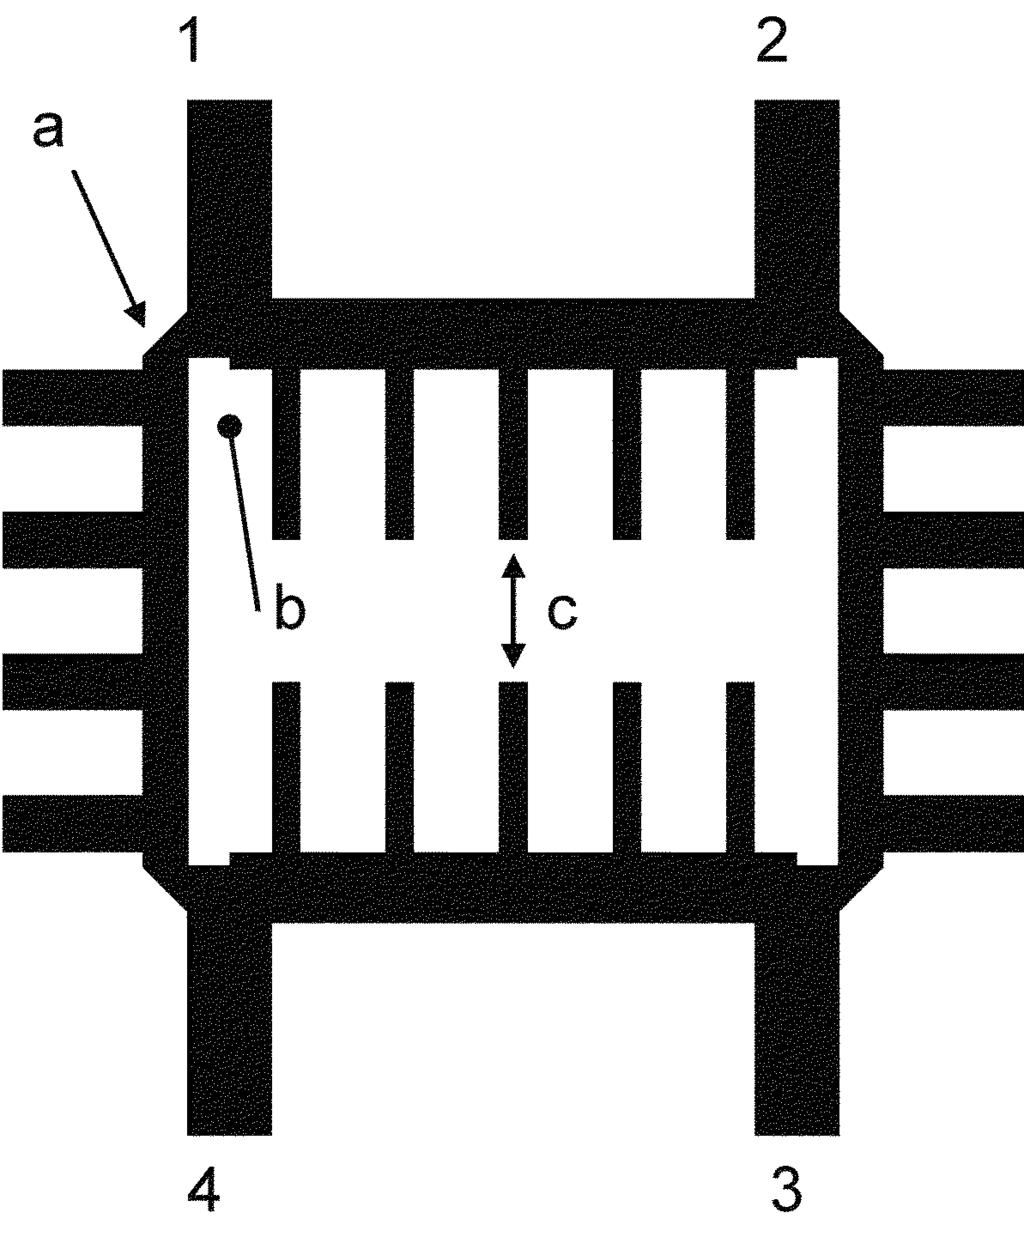 The artificial transmission line (ATL) concept has been applied to reduce the physical size of planar circuits [20] [24], of which some methods [22] [24], however, are more suited to MMICs.